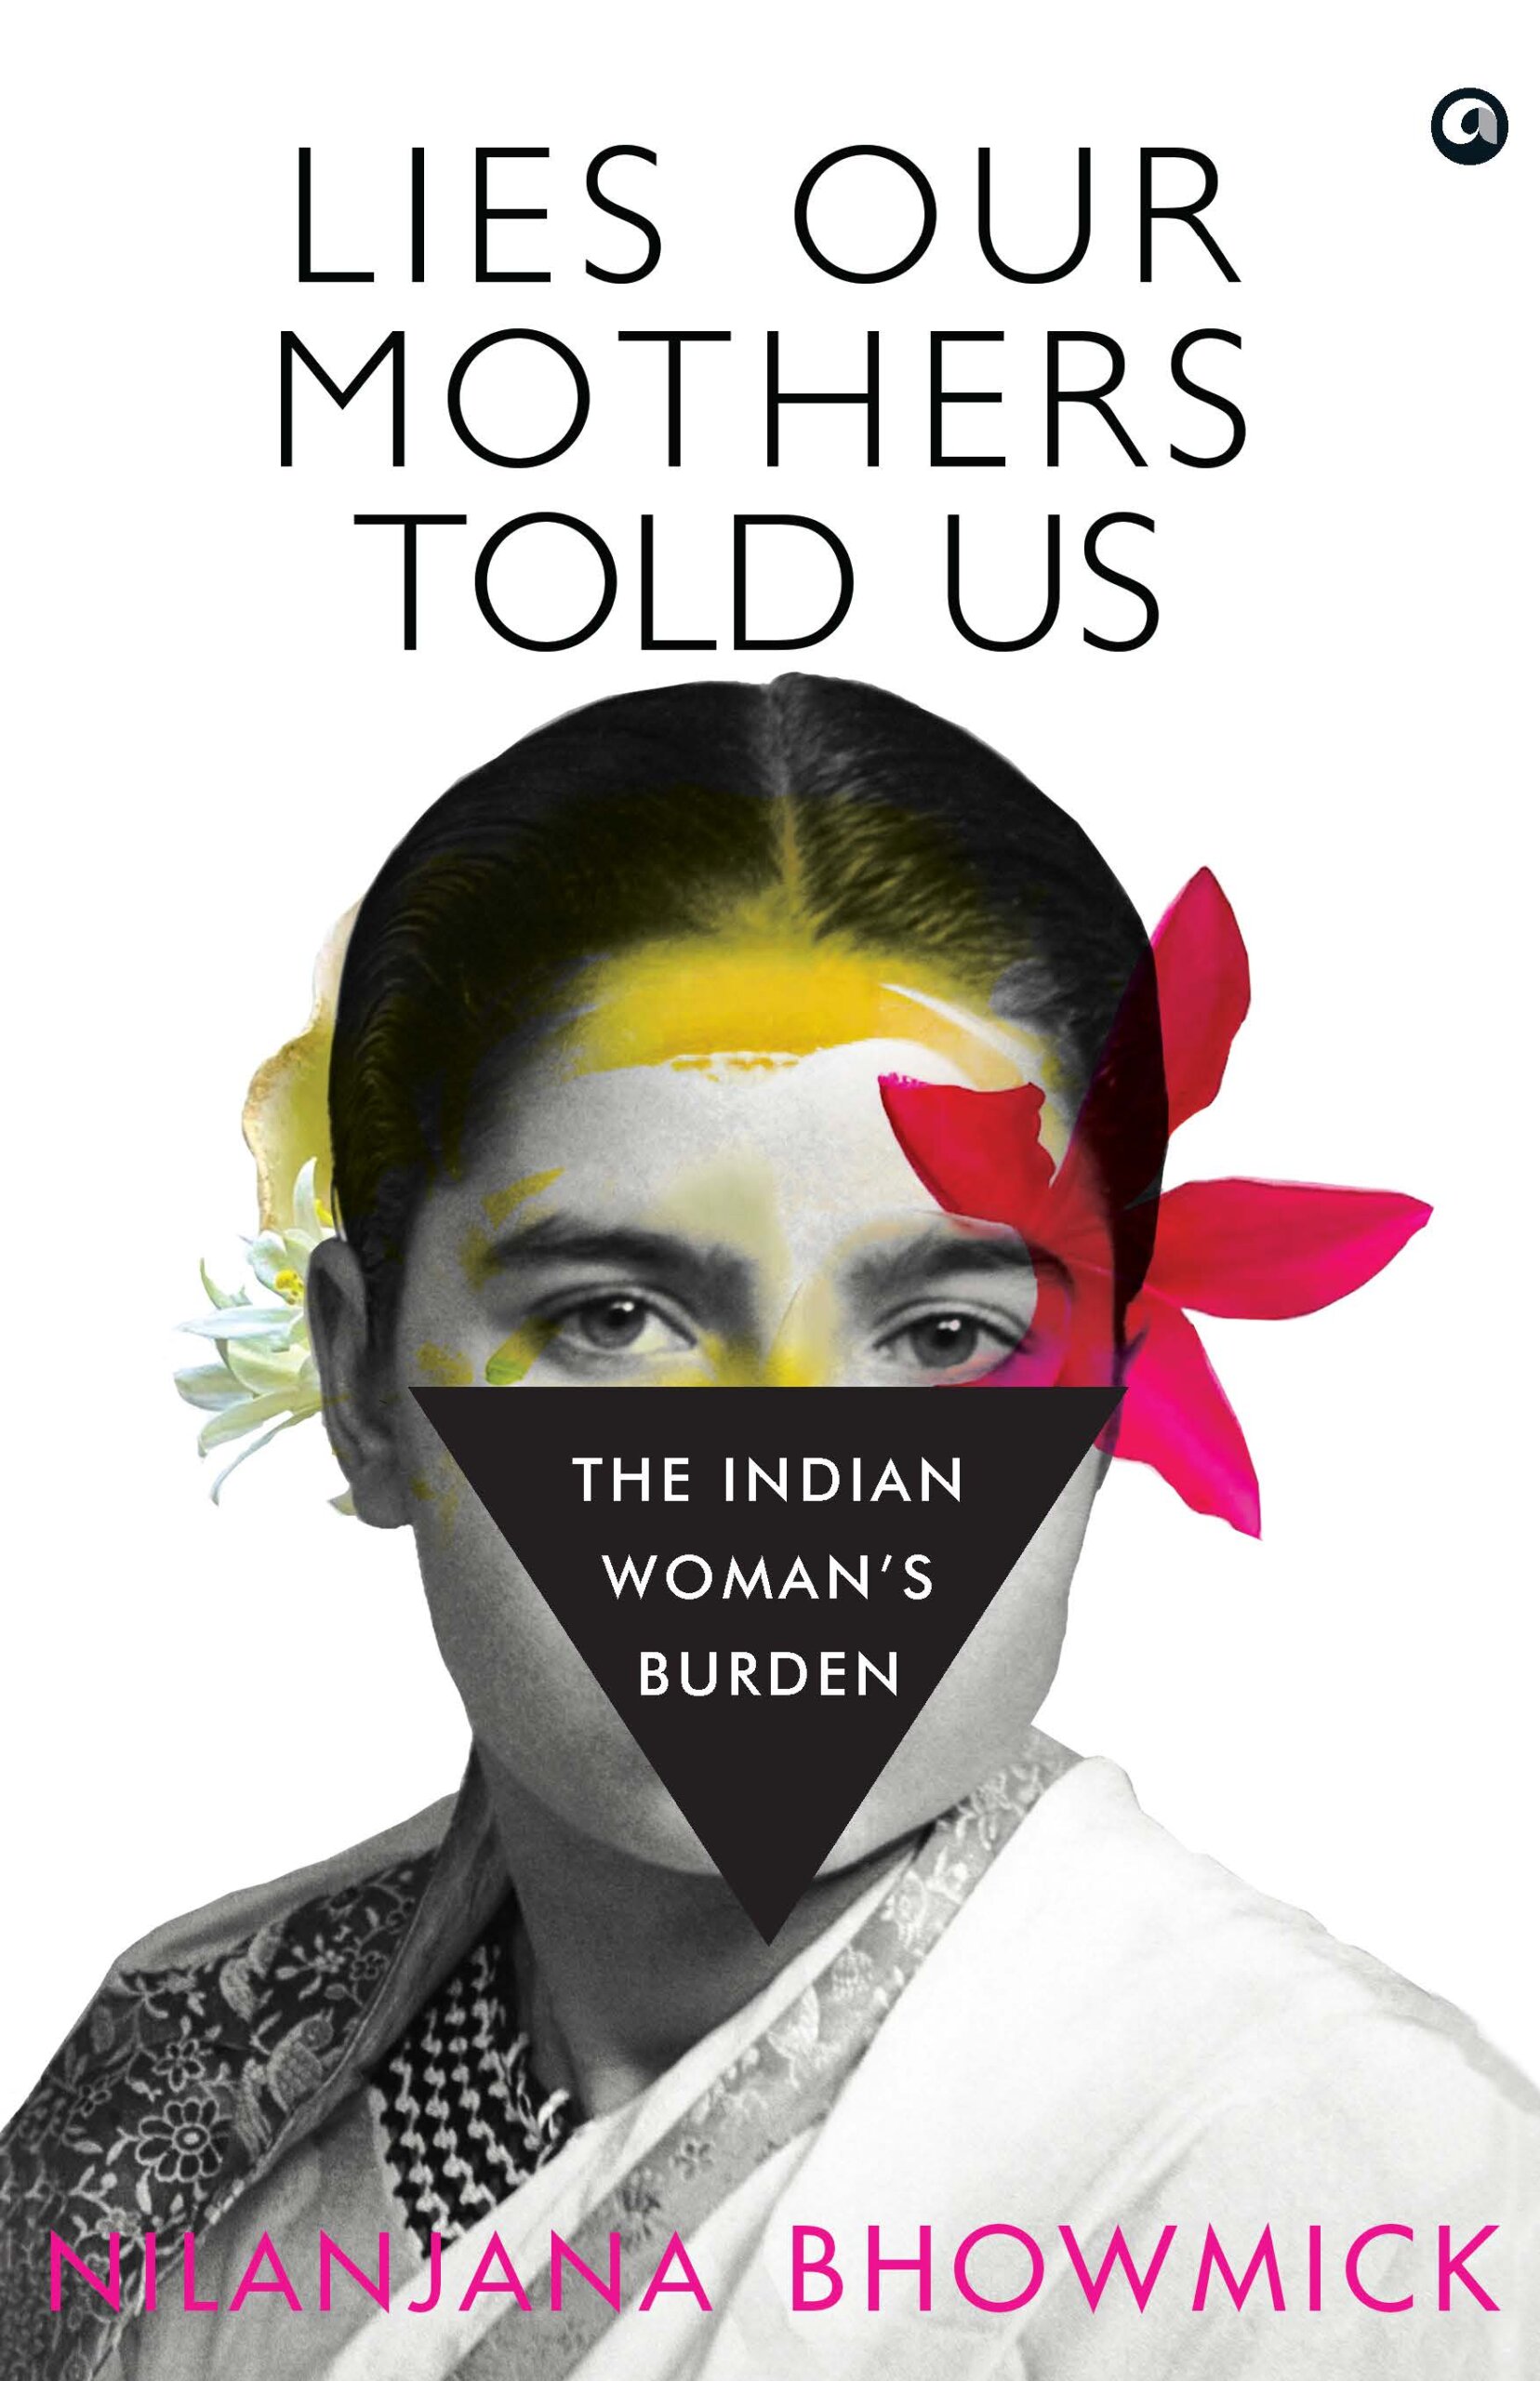 Lies Our Mothers Told Us: The Indian Woman’s Burden